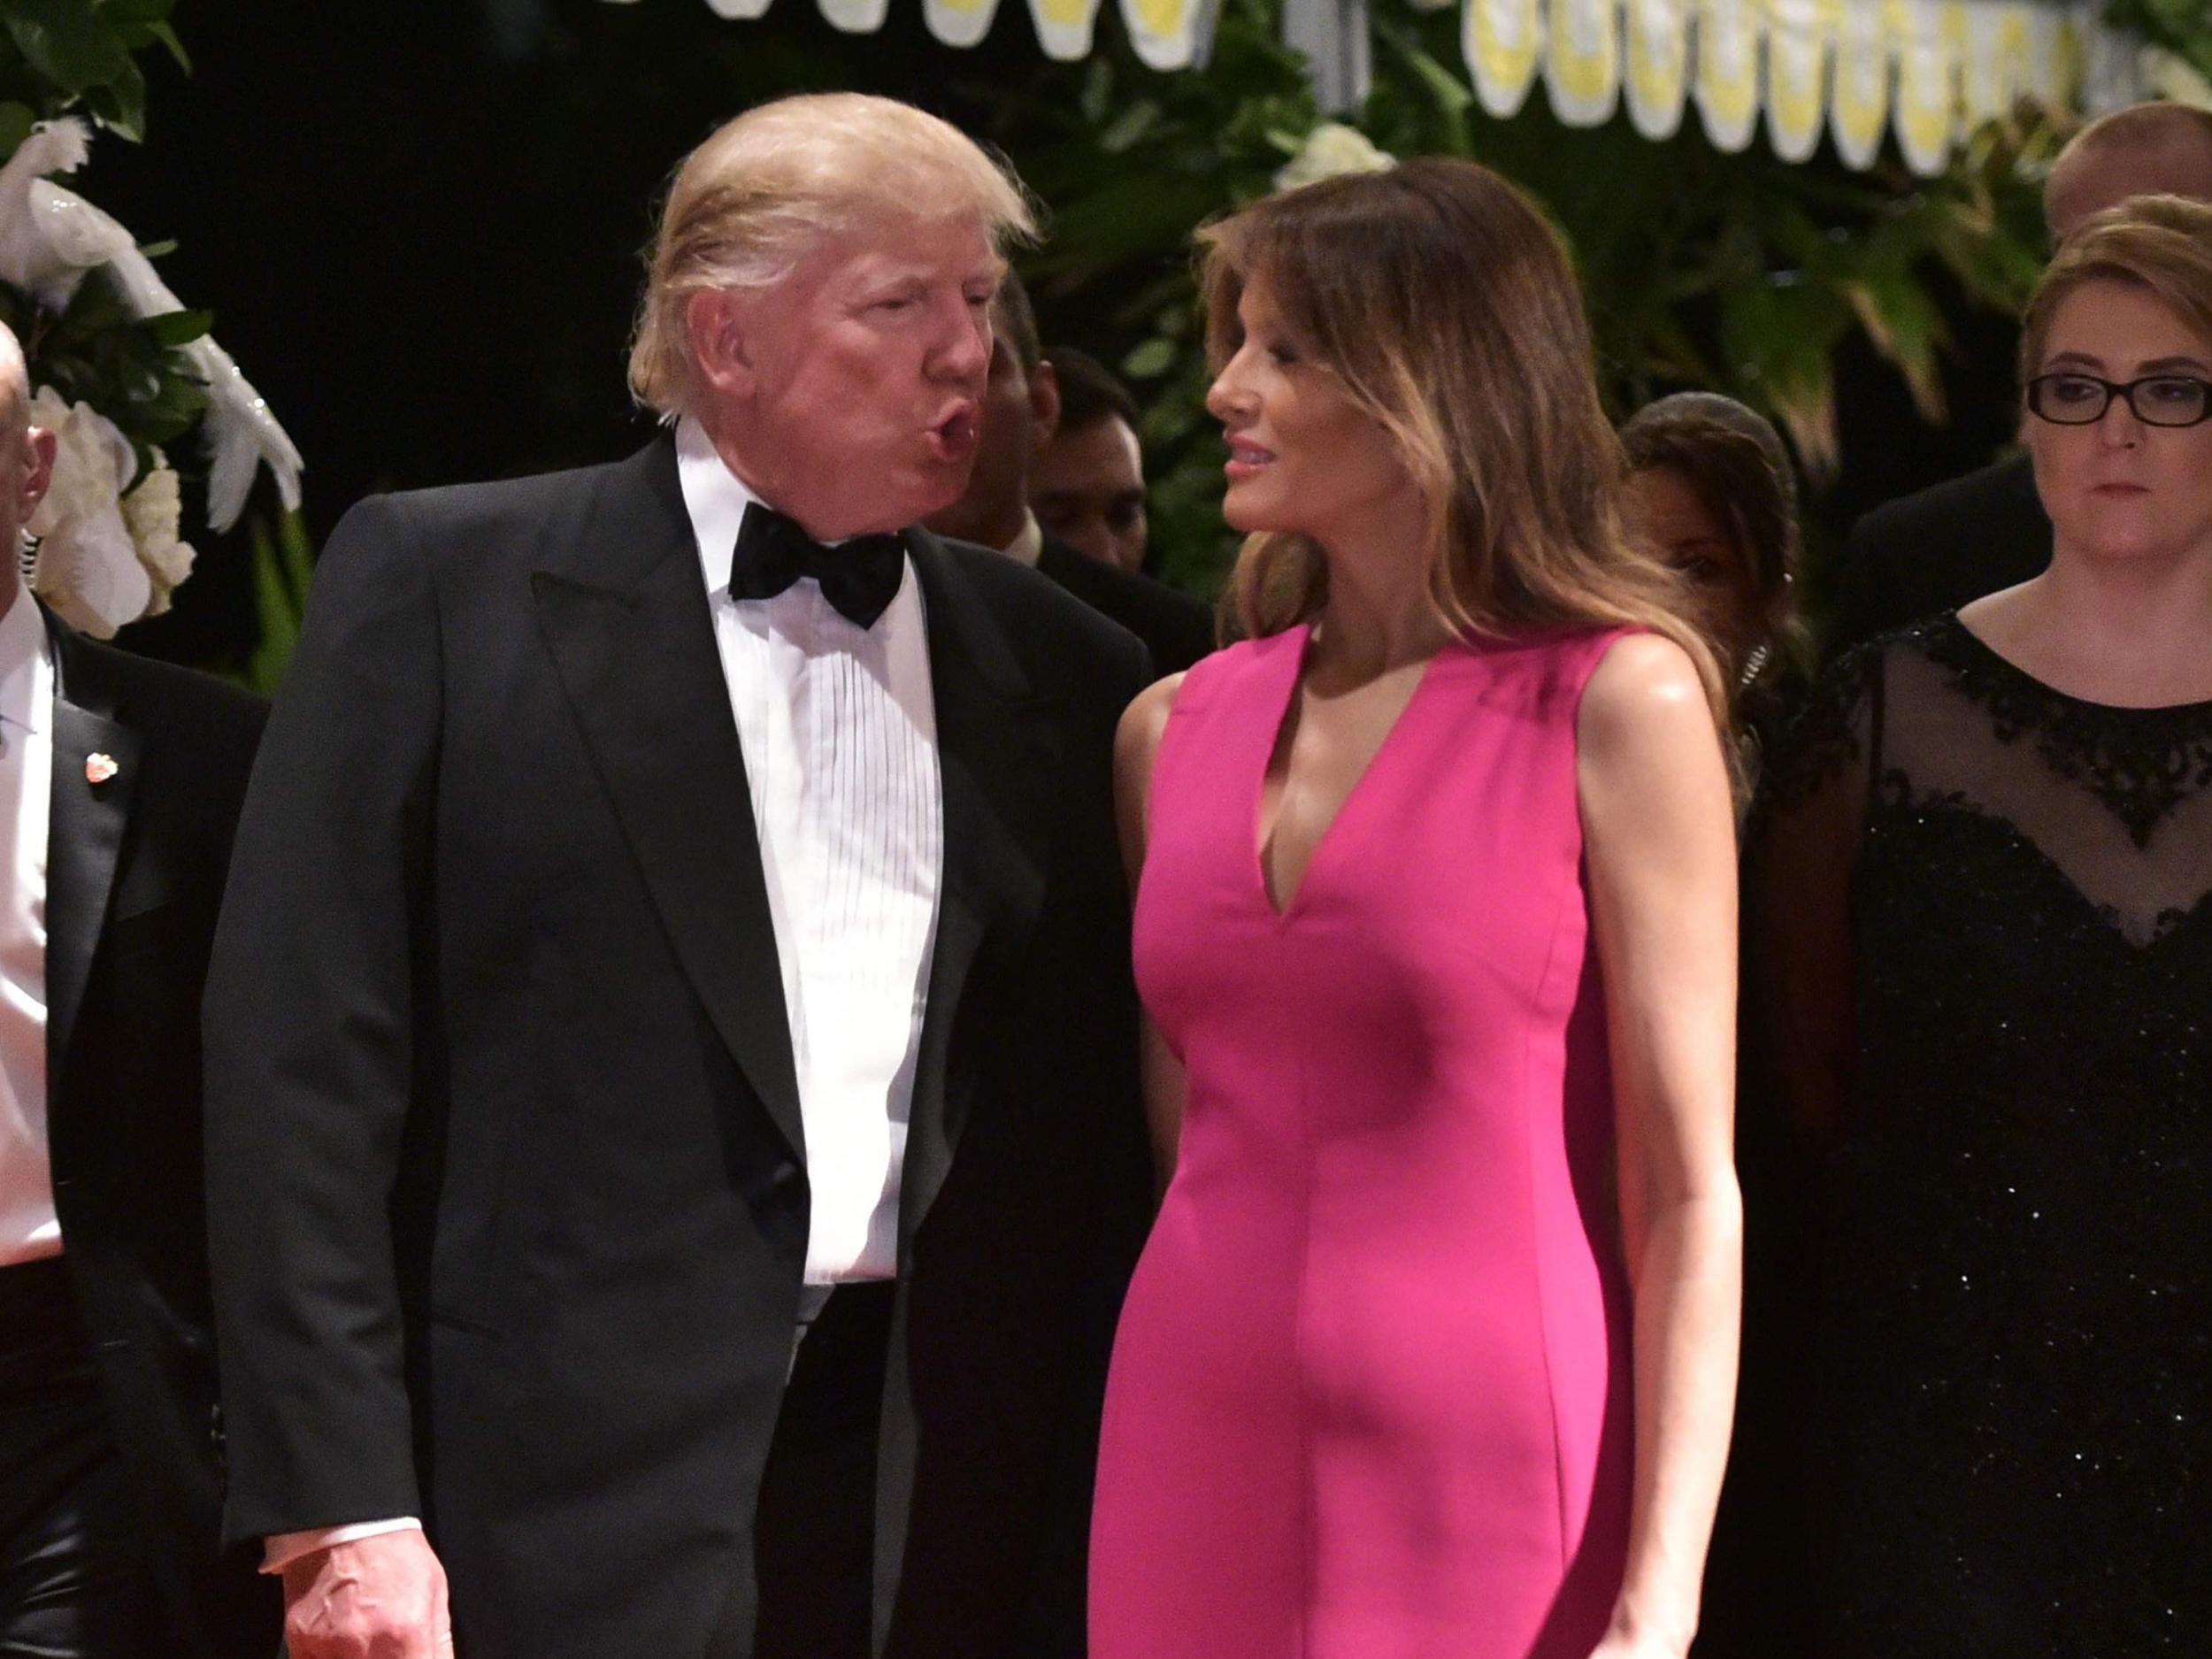 The Trumps arrive for the 60th Annual Red Cross Gala at his Mar-a-Lago estate in Palm Beach on Saturday